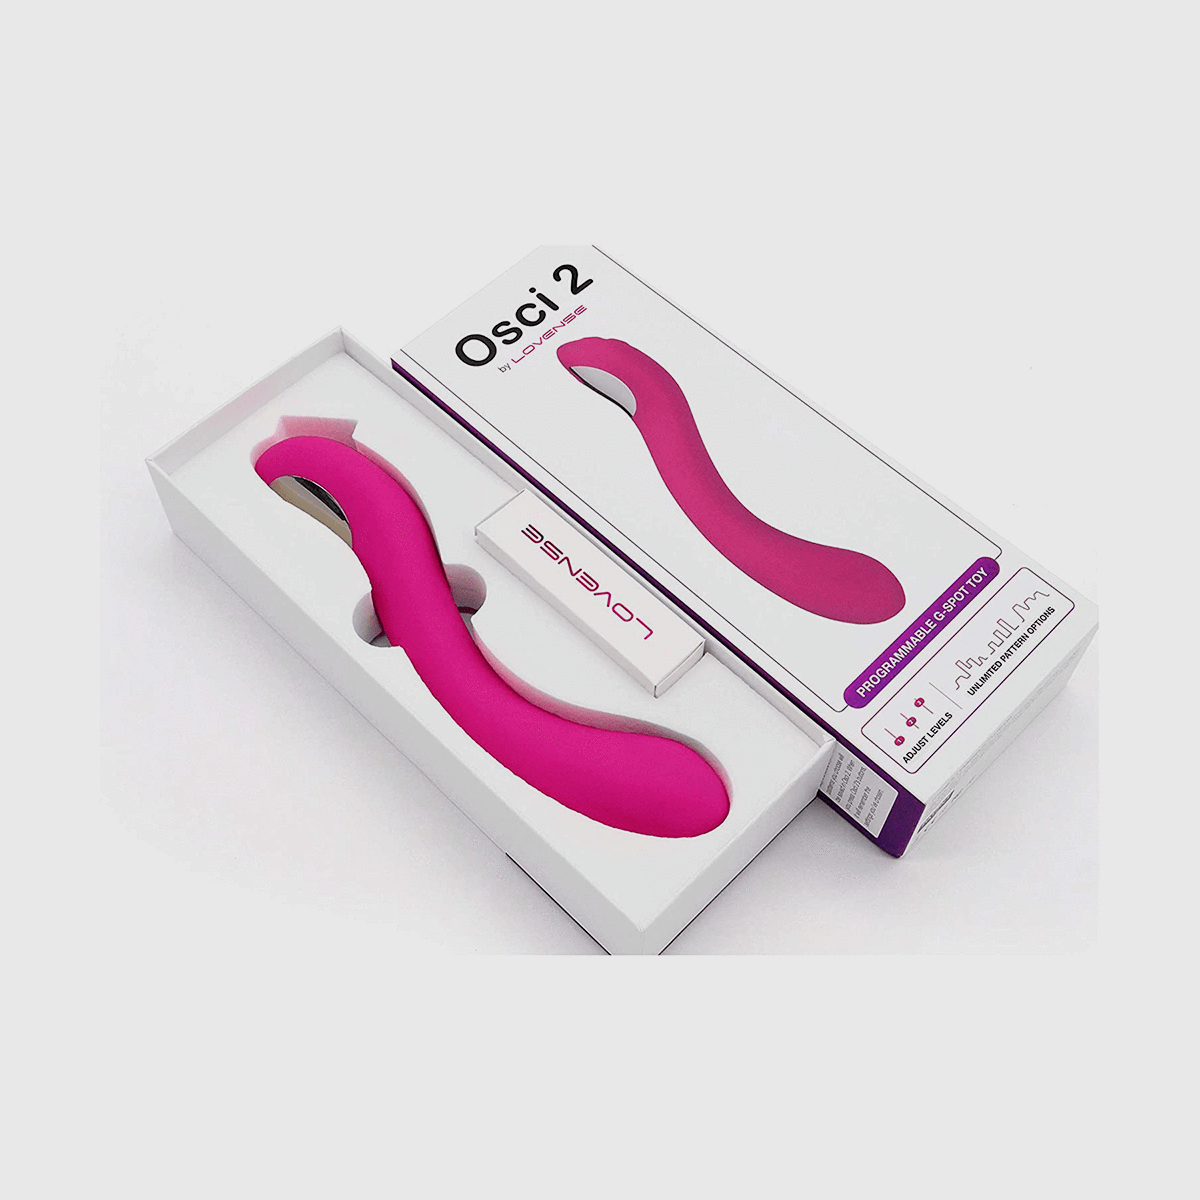 Lovense Osci 2 Bluetooth G-Spot Vibrator - Pink - Thorn & Feather Sex Toy Canada